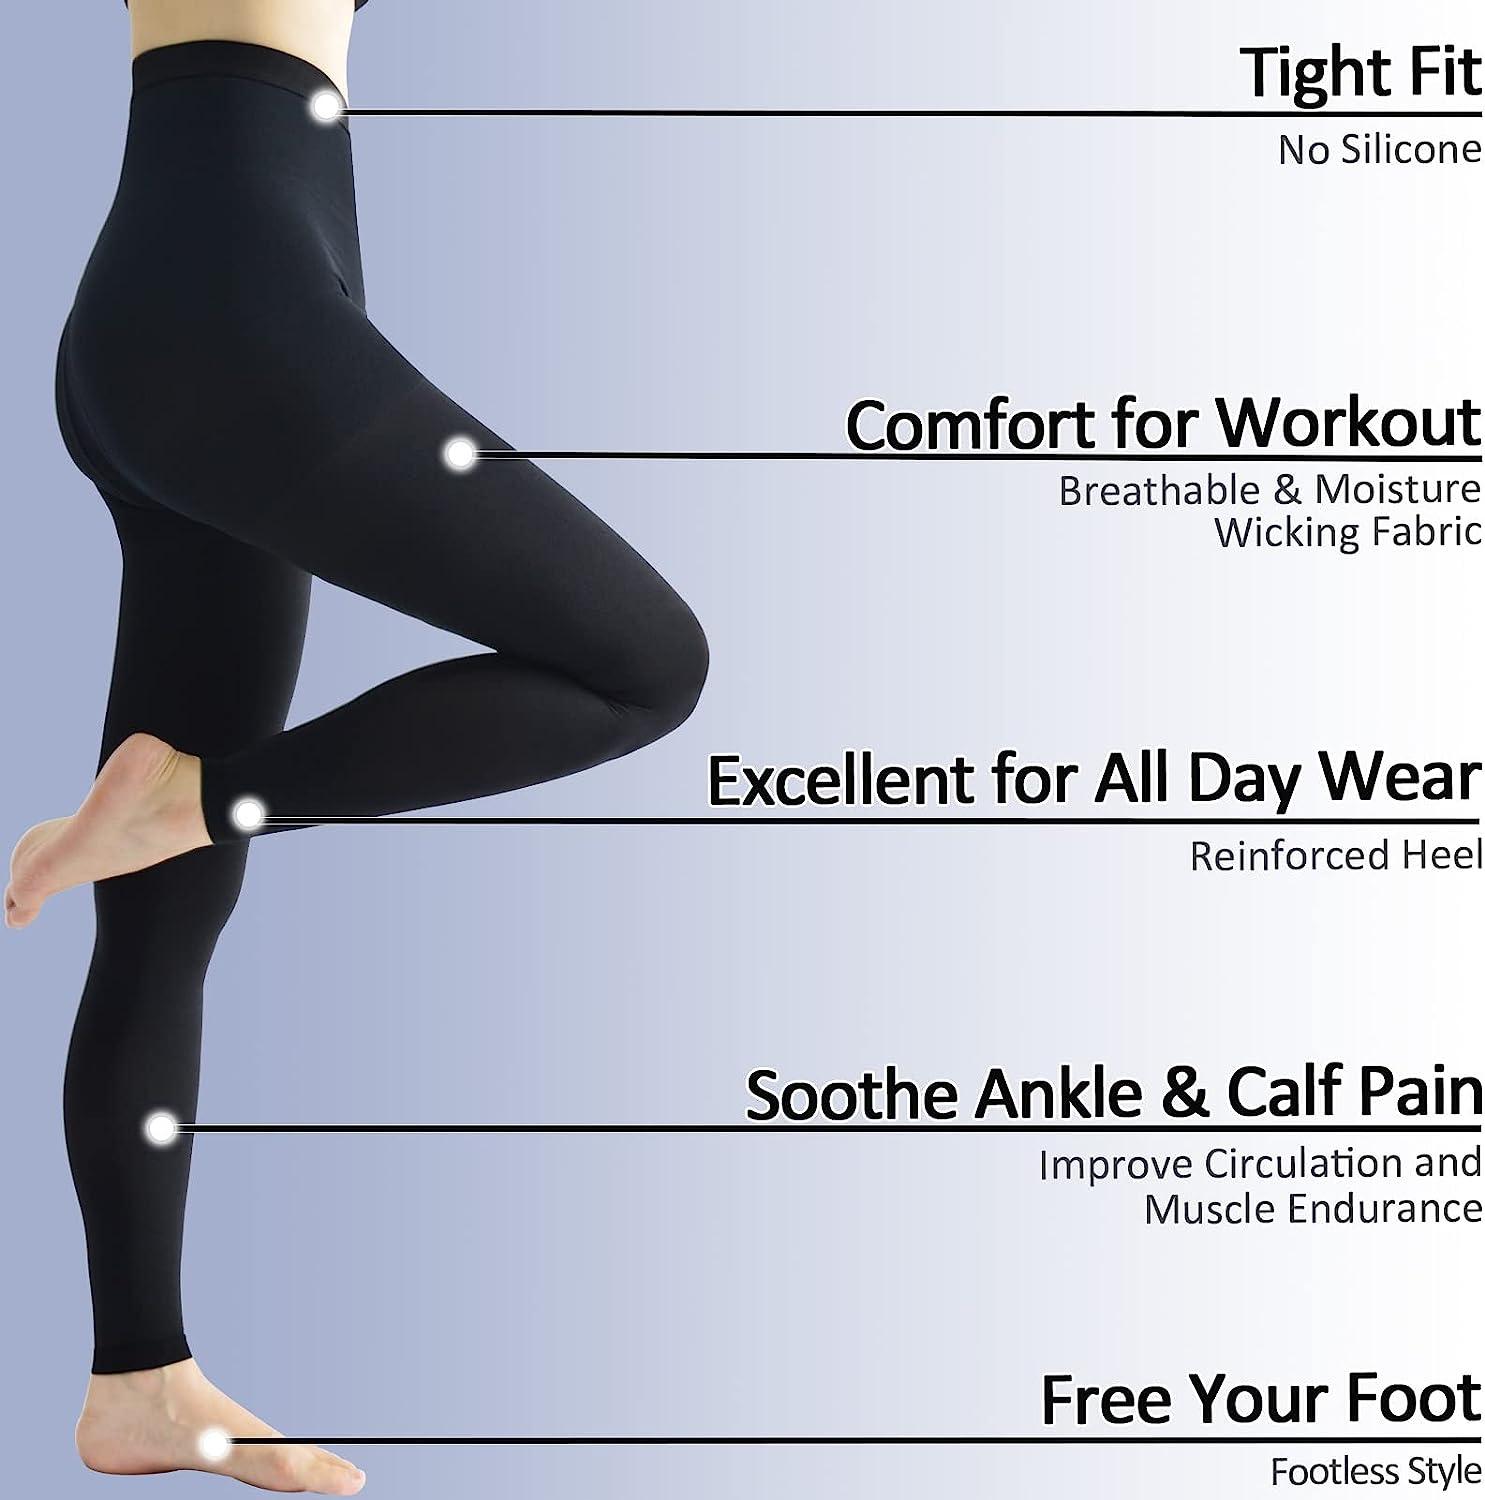  Compression Leggings For Women 20-30mmHg - Footles High  Waist Compression Tights For Circulation During Pregnancy